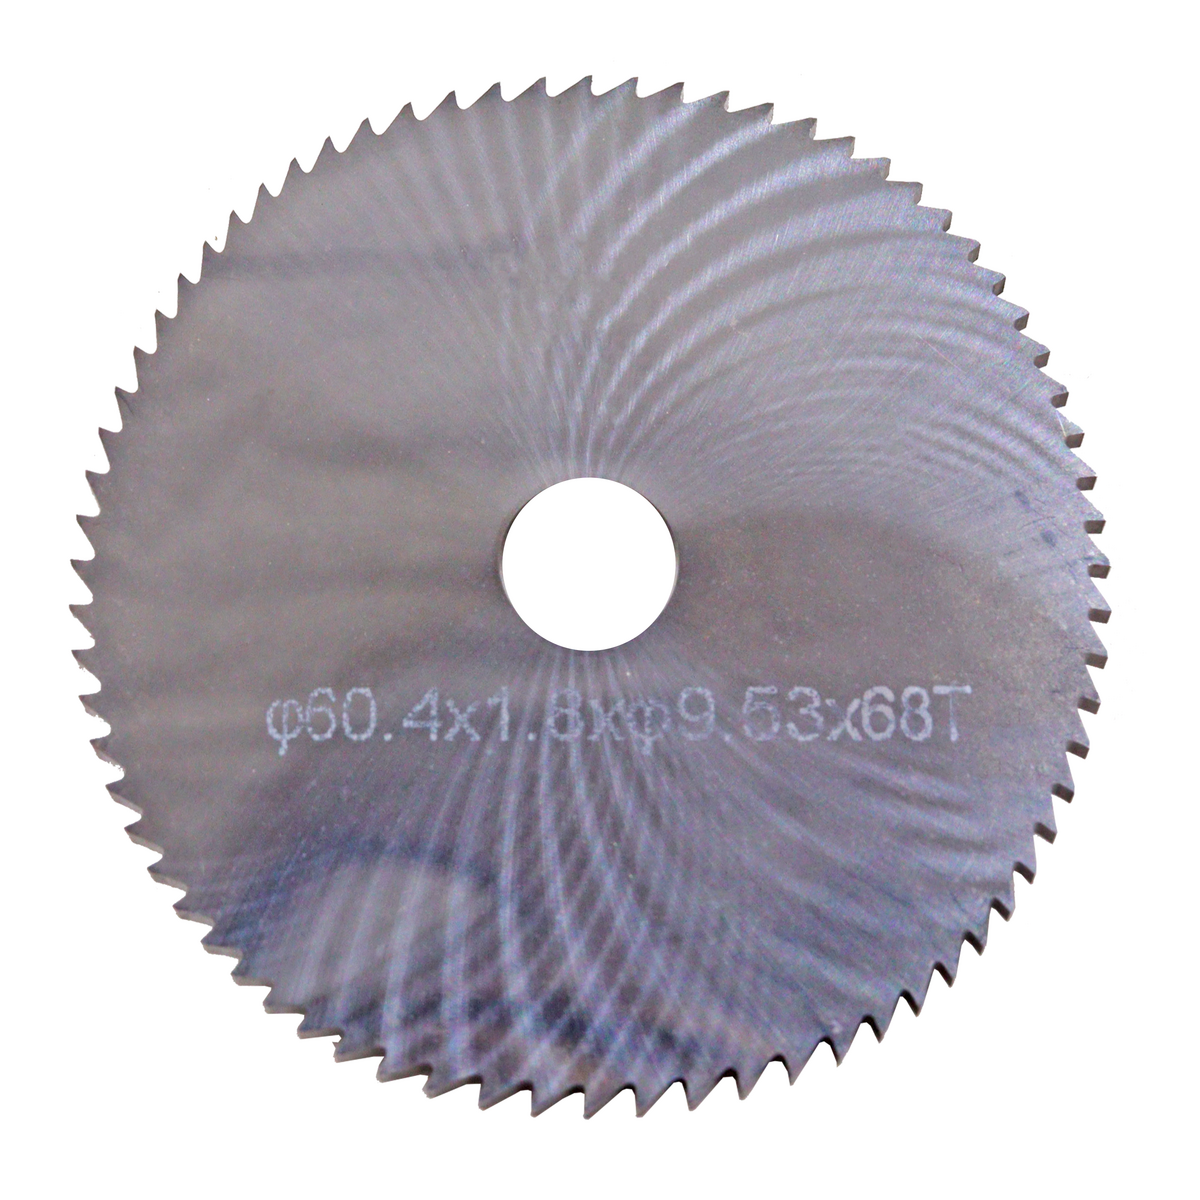 Steel Milling Cutter 05W Carbide To Suit Unocode